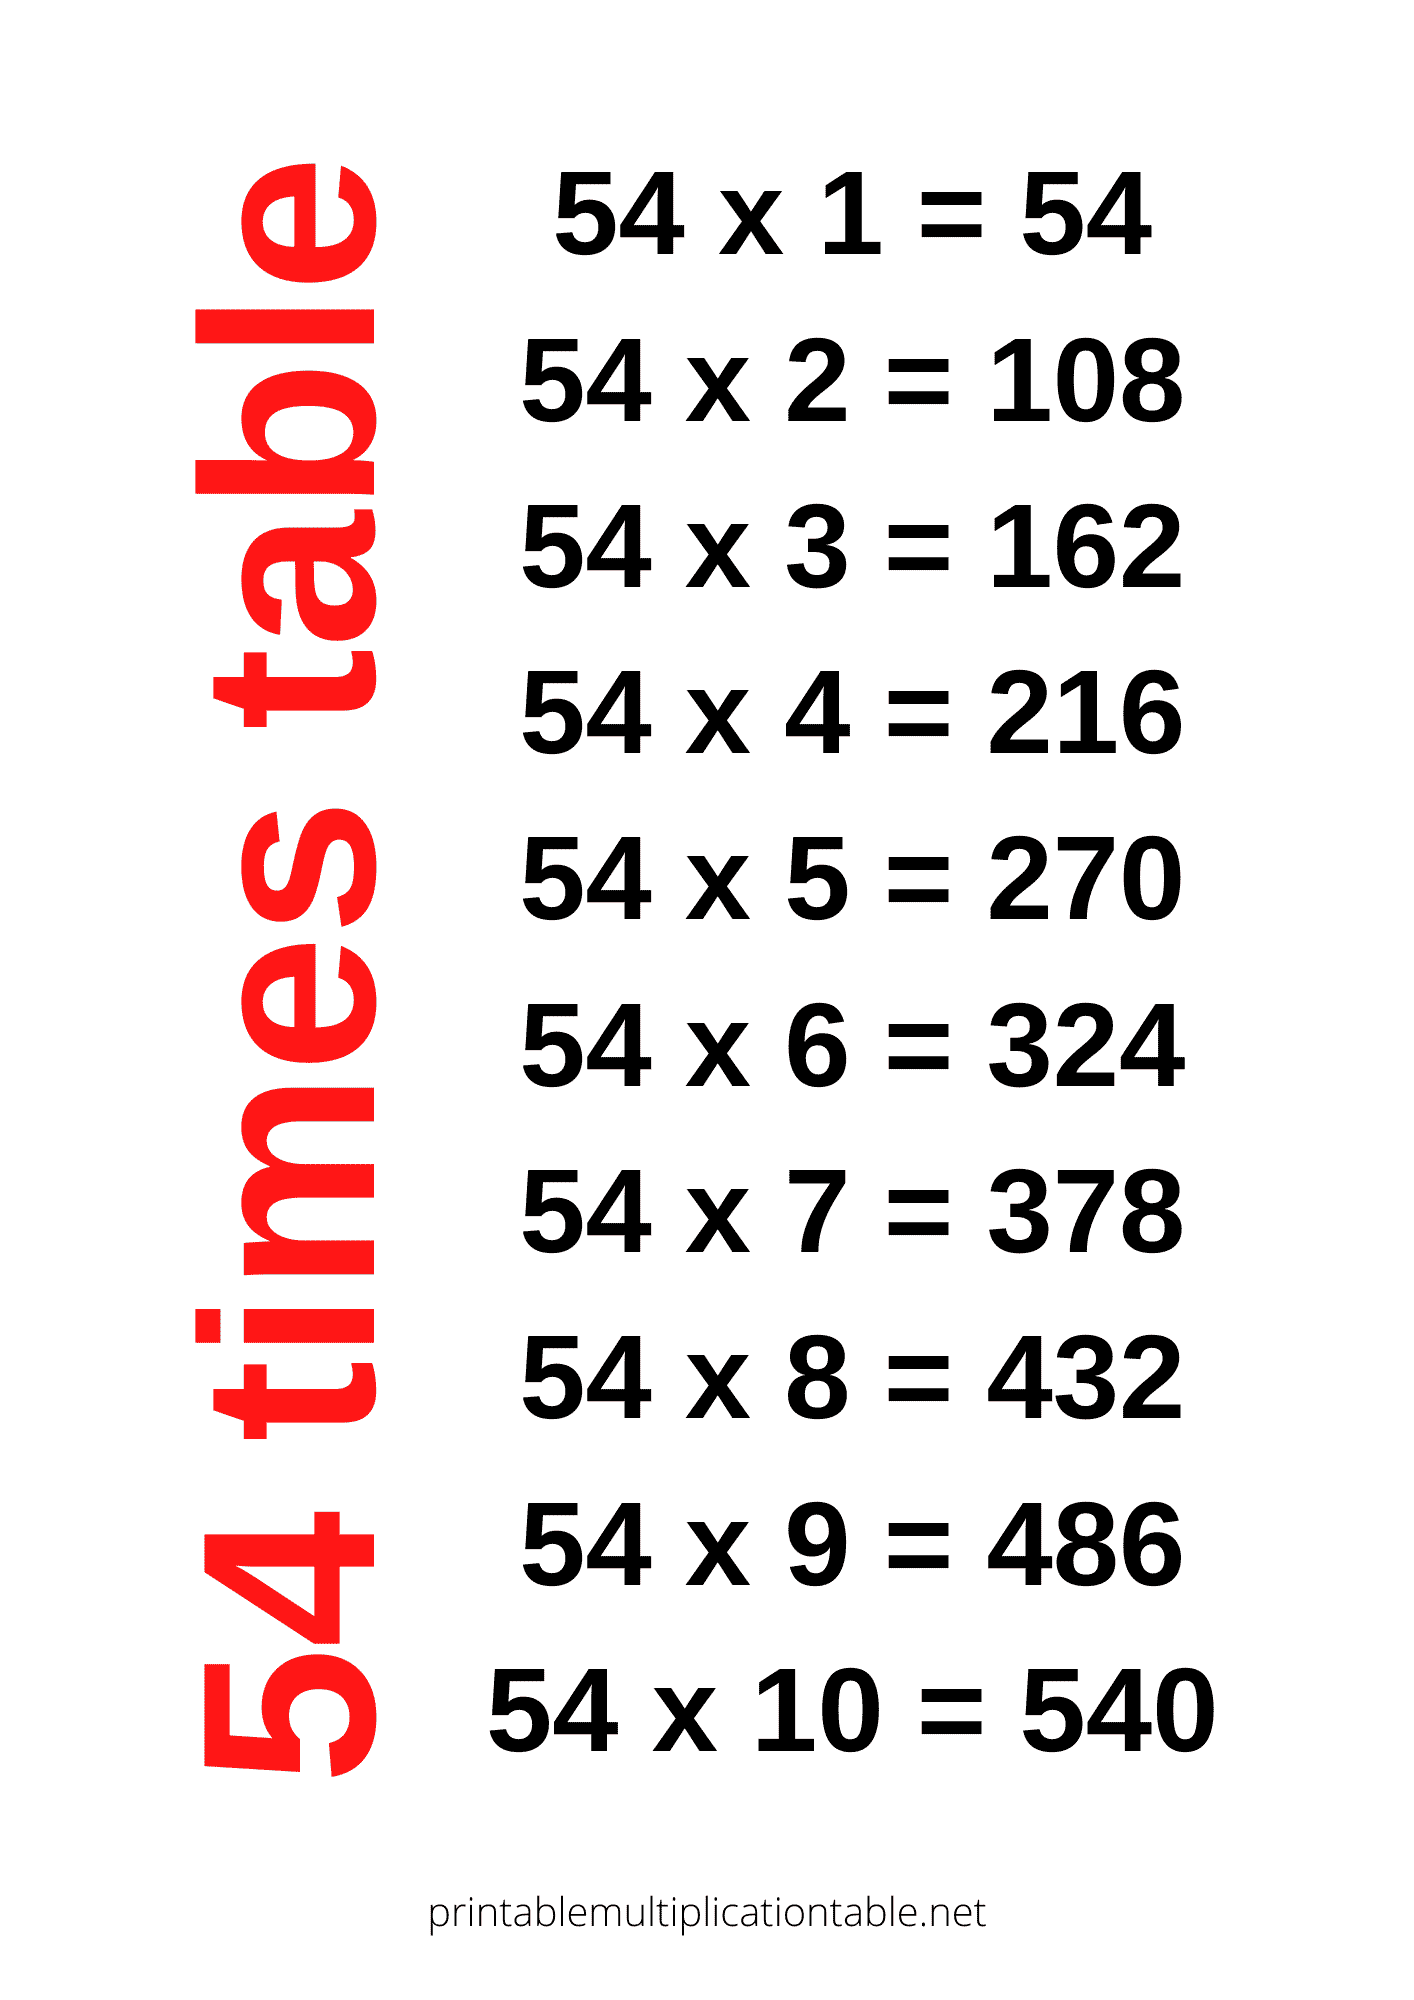 54 times table chart